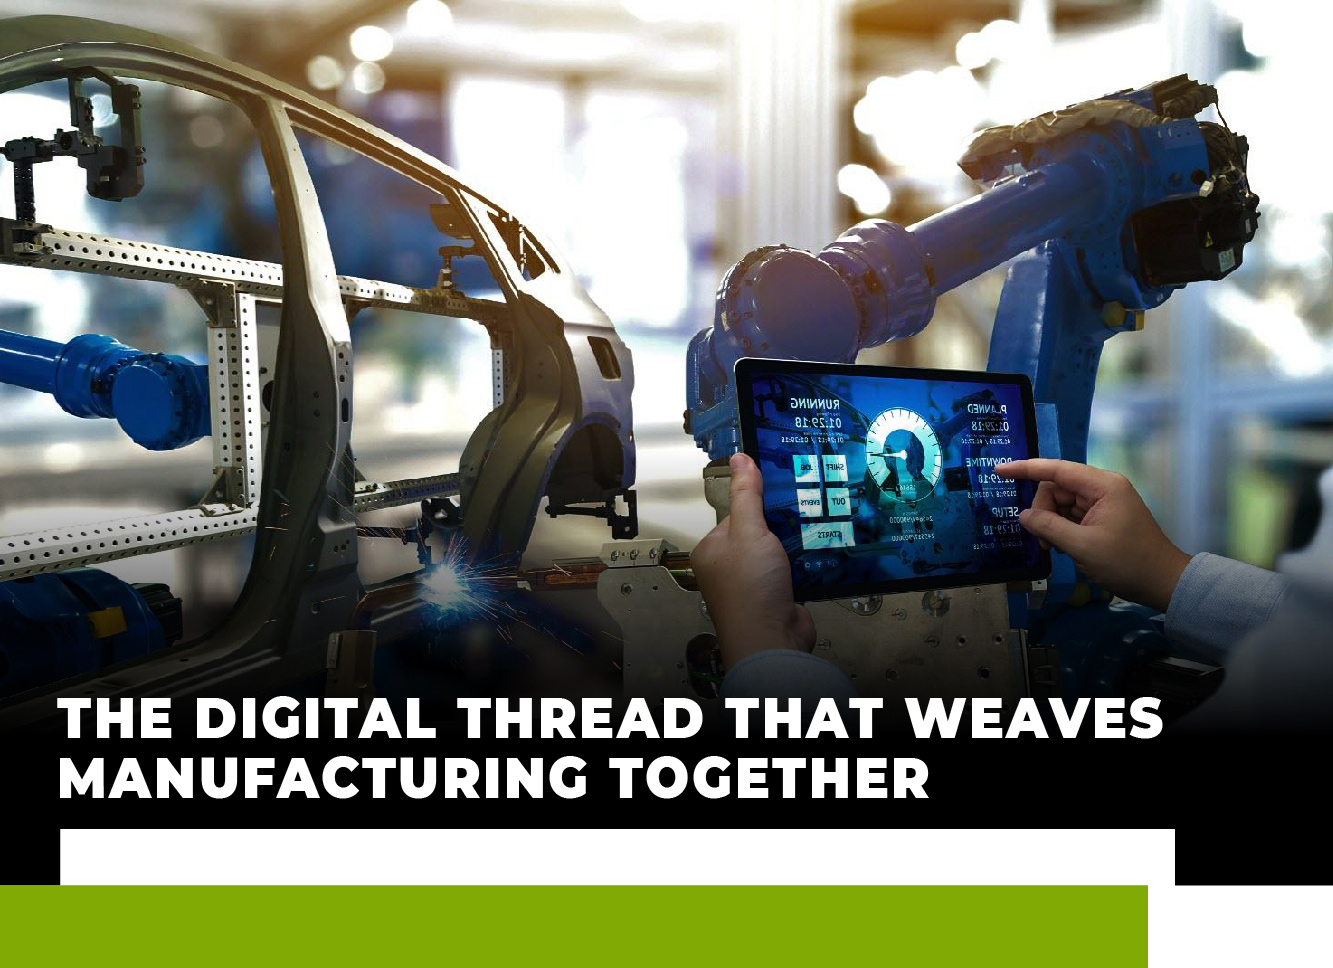 THE DIGITAL THREAD THAT WEAVES MANUFACTURING TOGETHER